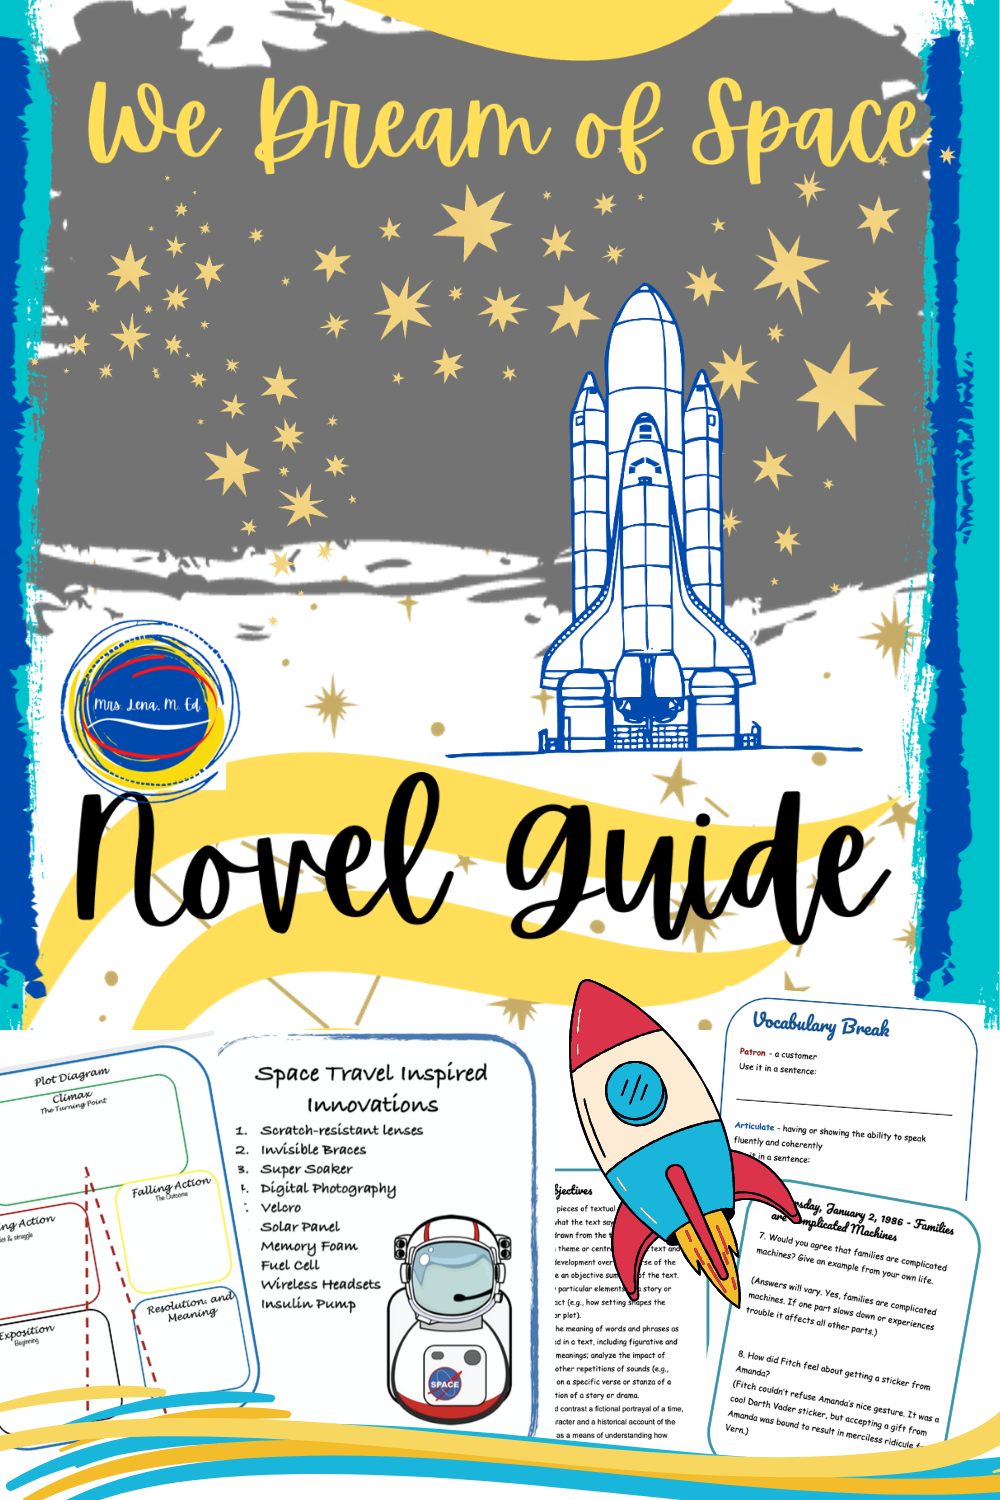 We Dream of Space by Erin Entrada Kelly NO Prep Novel Guide is a perfect resource for teaching about the Challenger tragedy, American history, coming-of-age, family and sibling dynamics, as well as reading comprehension skills, character analysis, cause and effect and SO MUCH MORE!